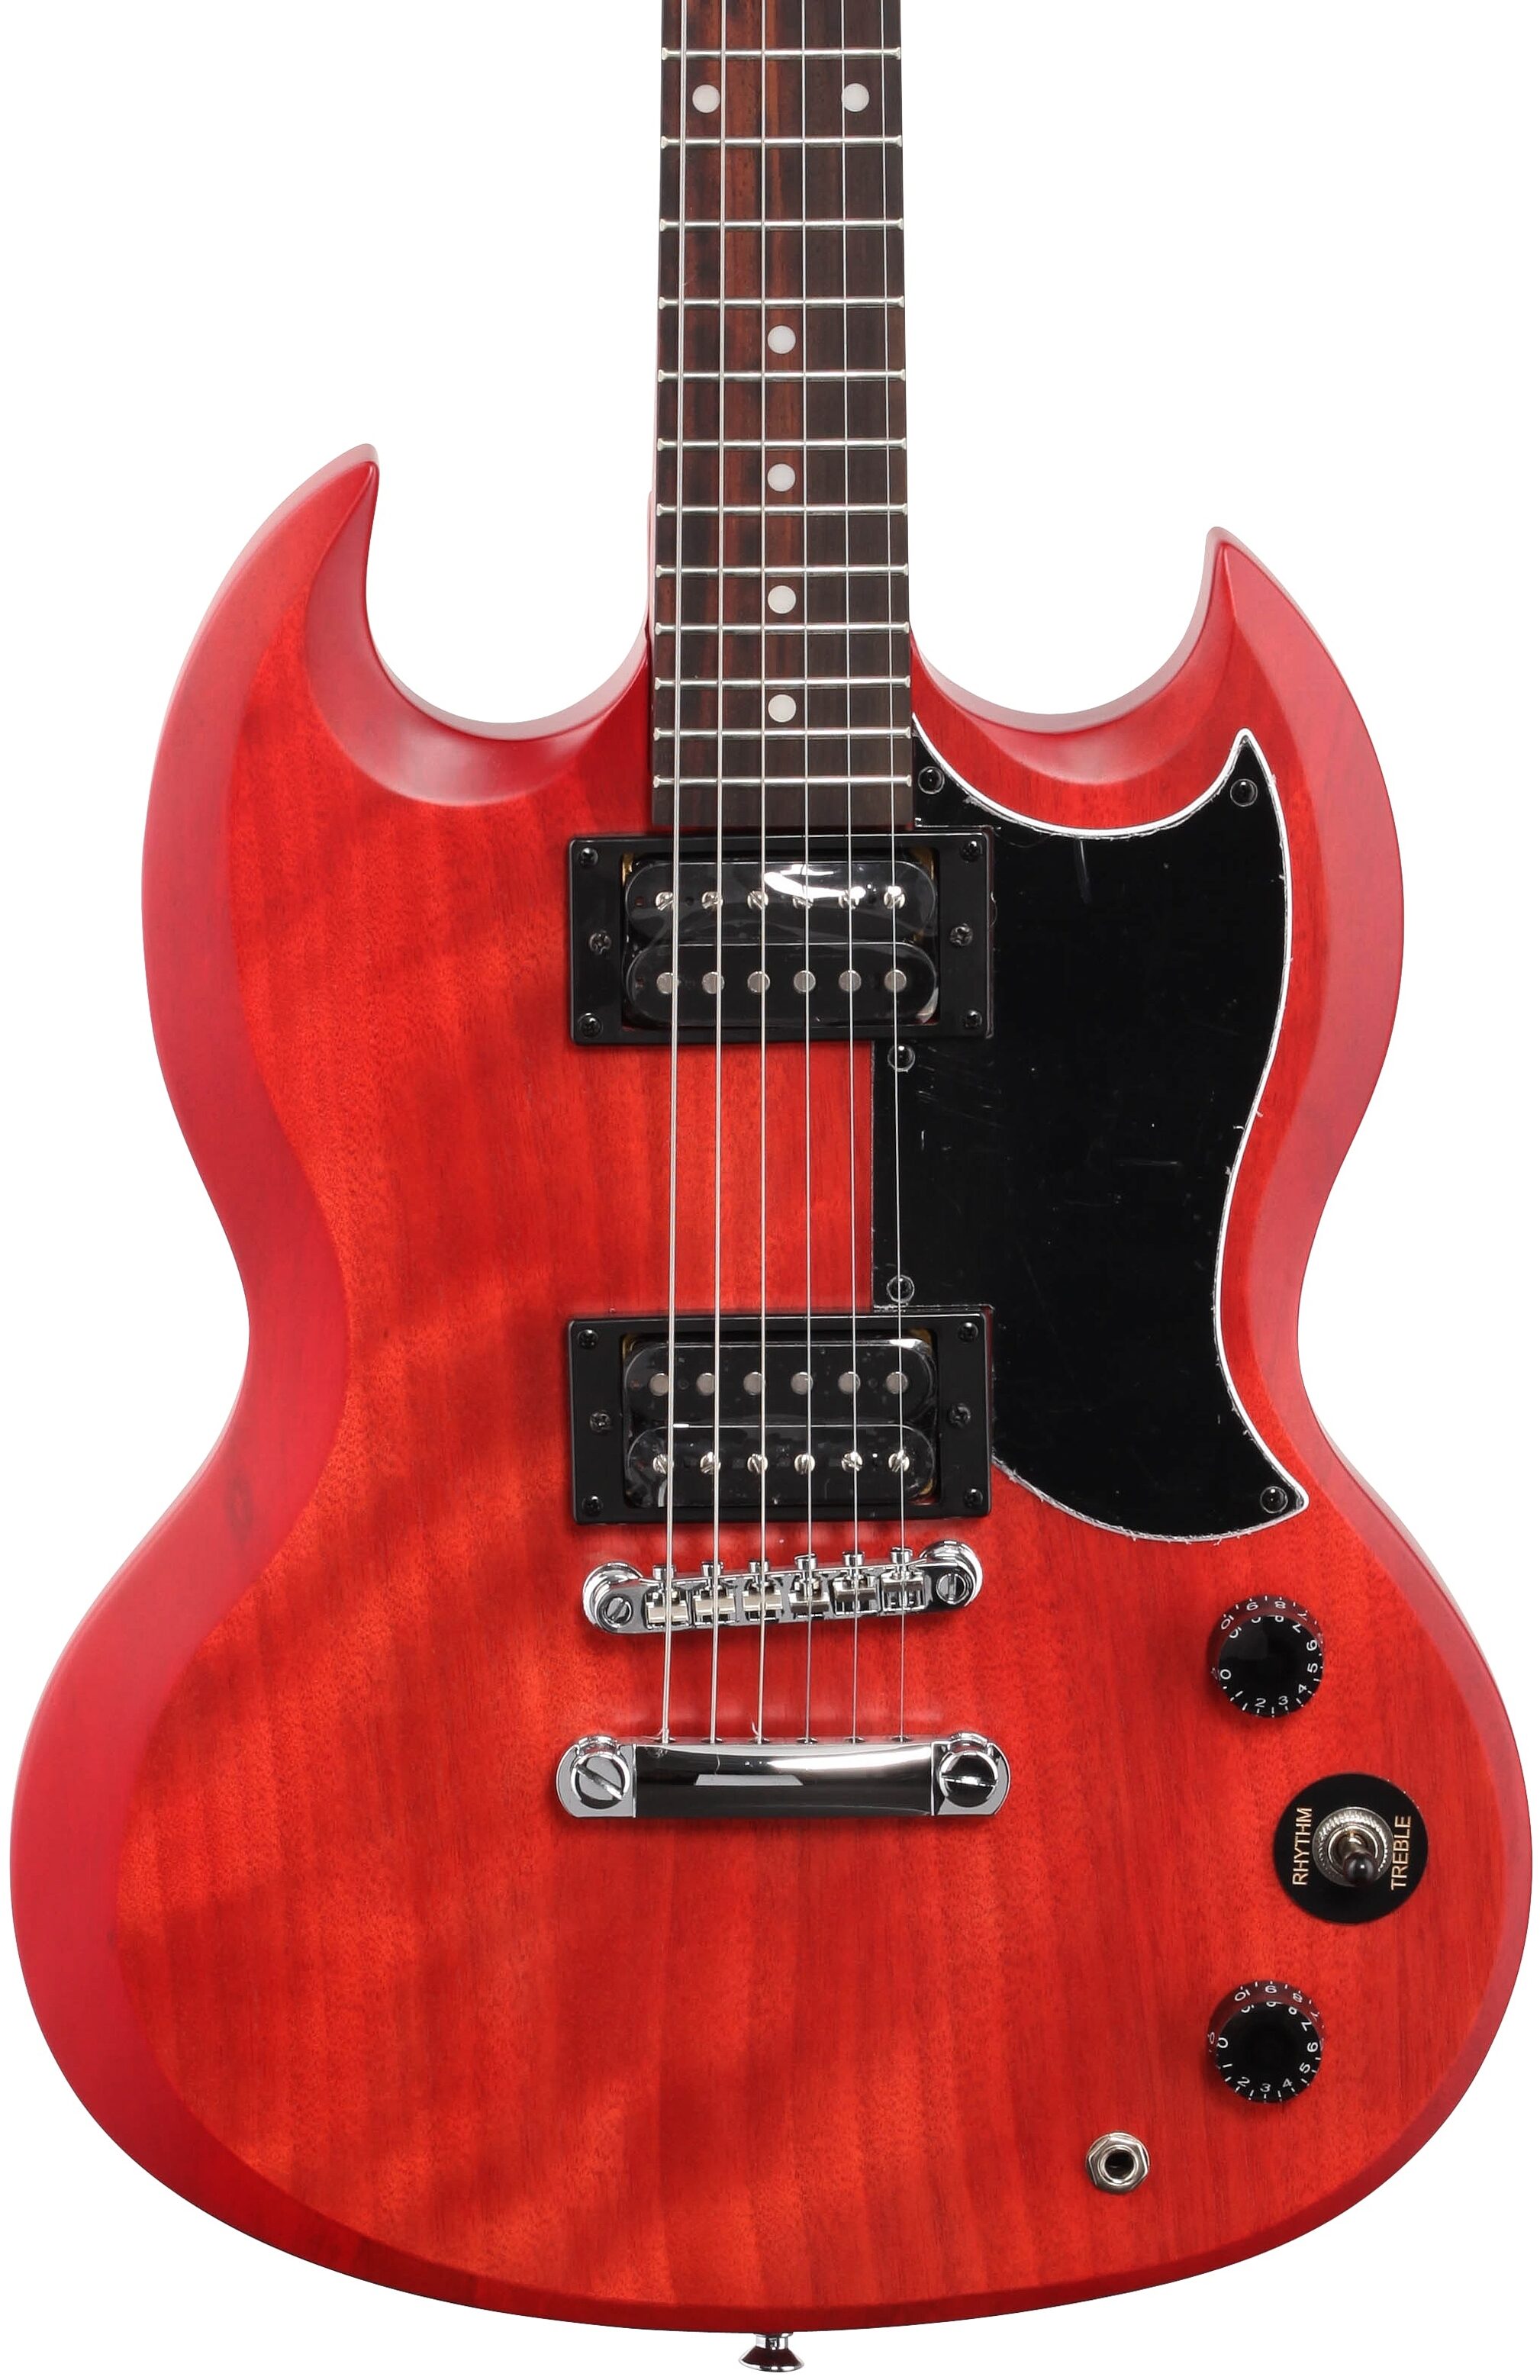 Epiphone SG Special VE Electric Guitar